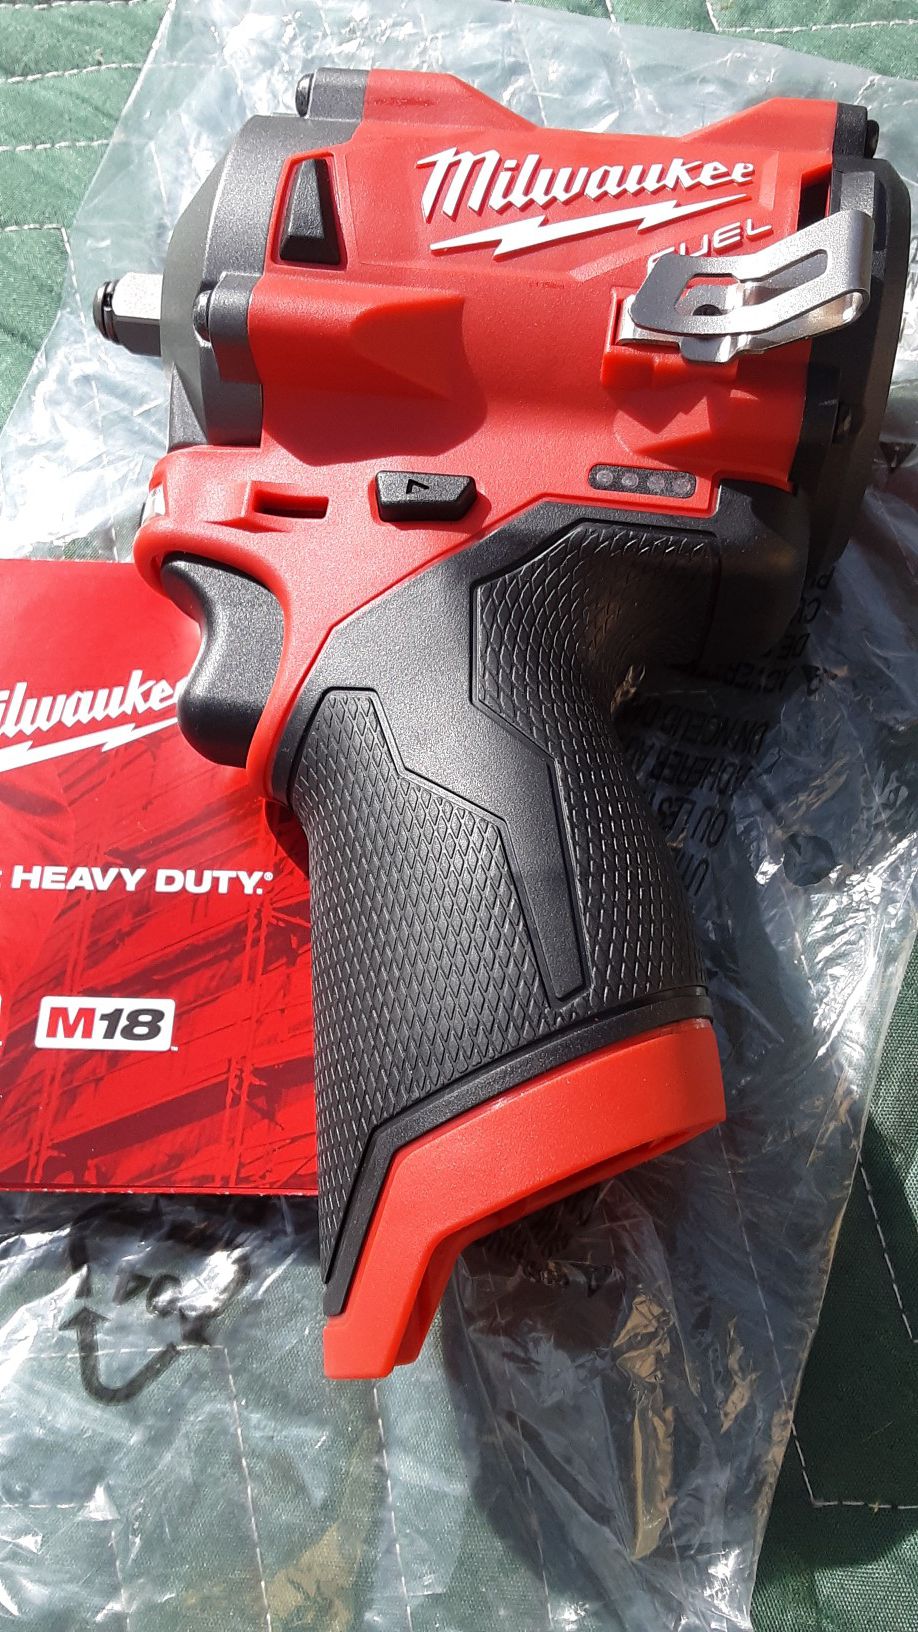 Milwaukee M12 3/8" Stubby Impact Wrench/ Pick-up Only Van Nuys!